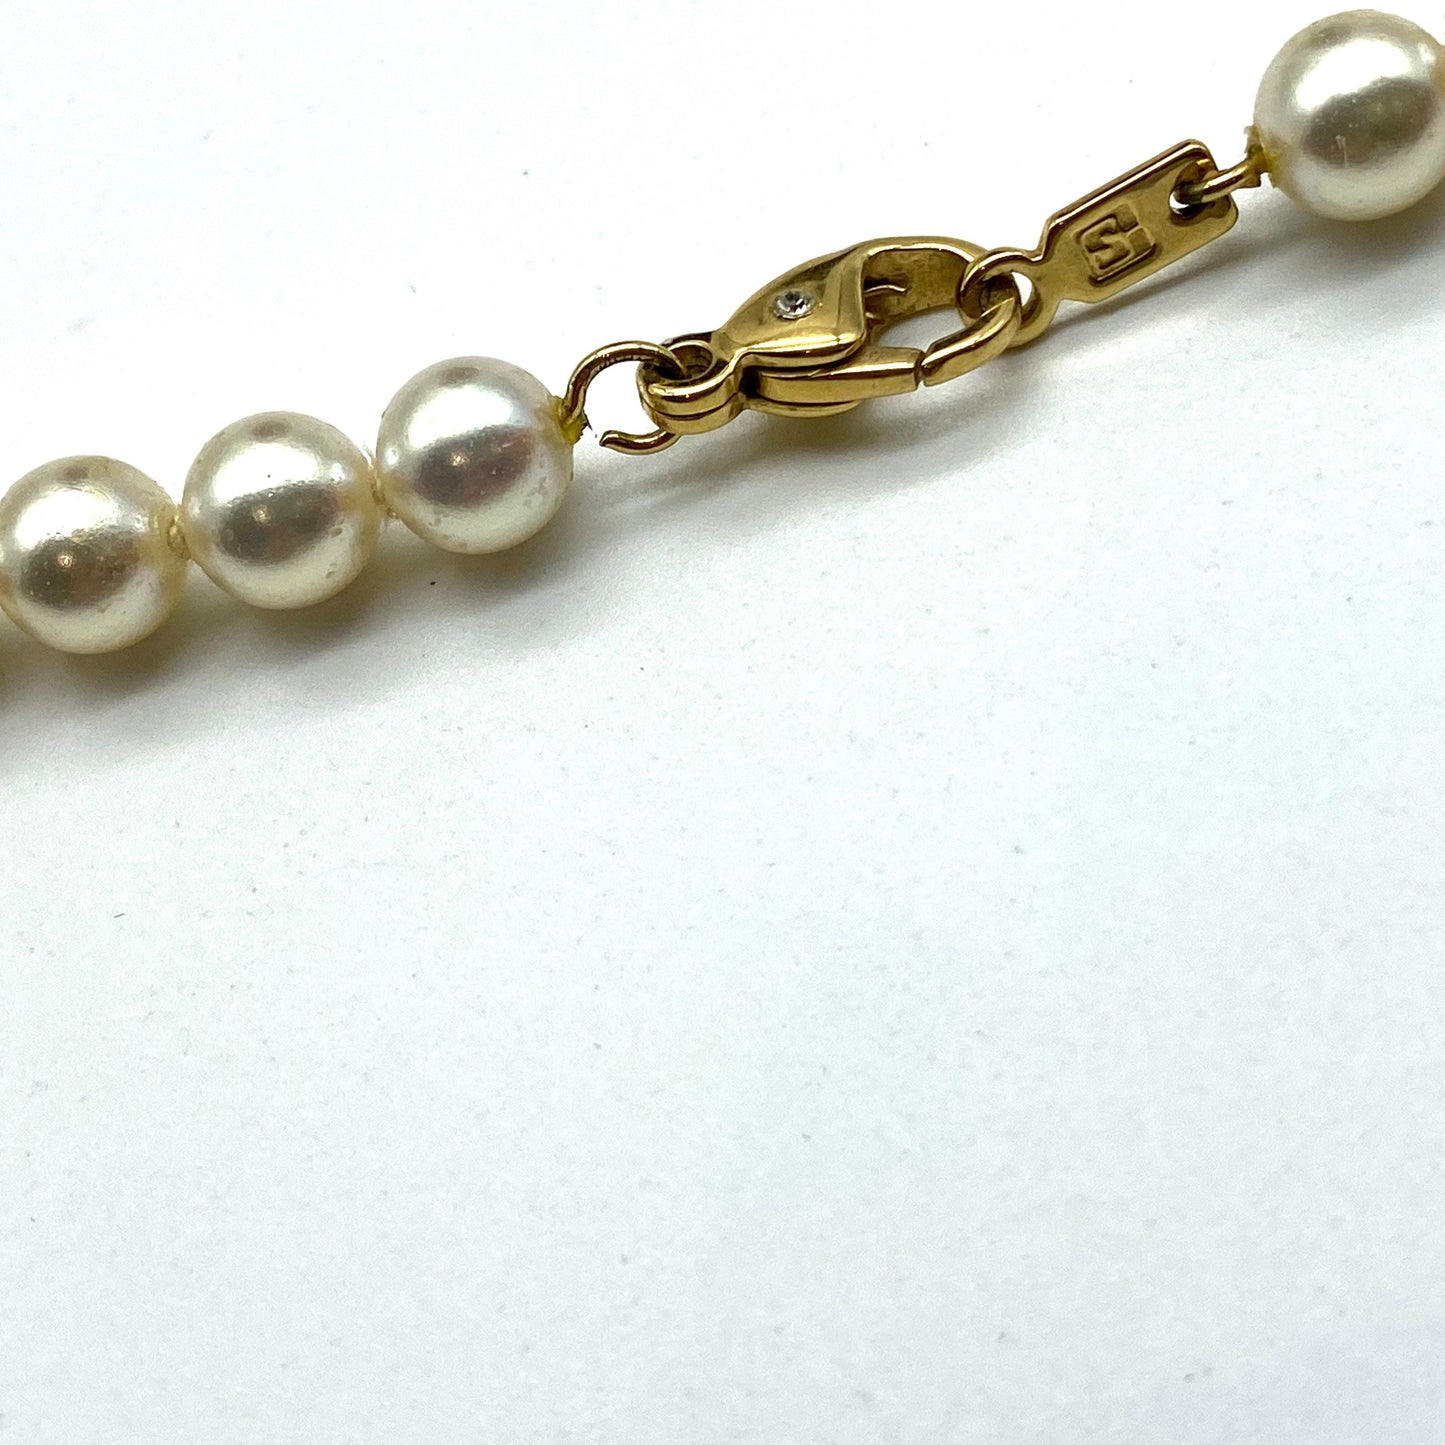 Swarovski Knotted Faux Pearl and Crystal Necklace (Old Hallmark)